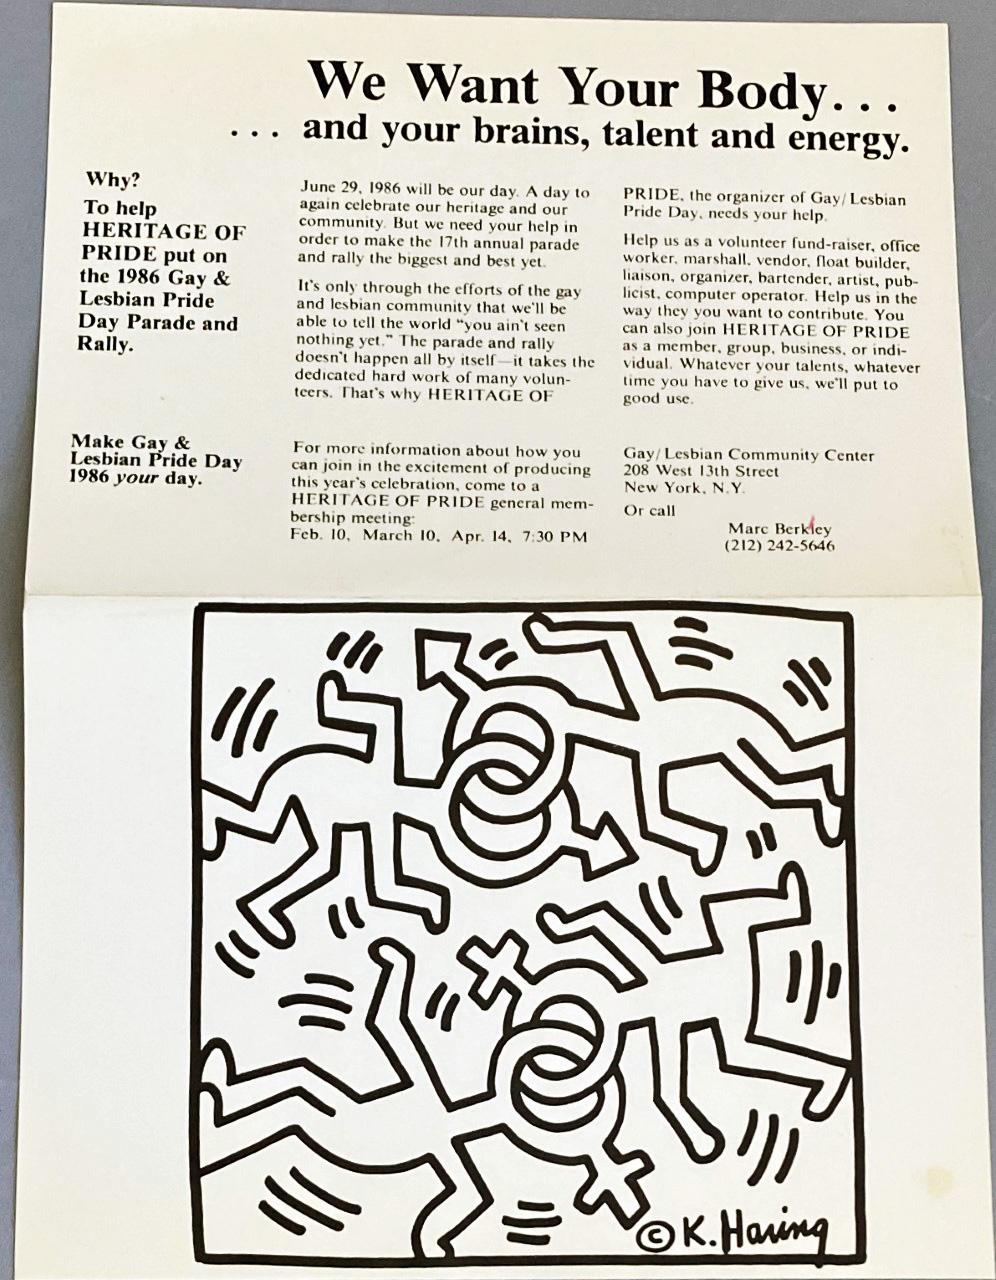 Keith Haring New York 1986: 
Keith Haring illustrated folding-invitation for Gay/Lesbian Pride Day at New York's Palladium nightclub, 1986. Executed during Haring’s lifetime. Rare & highly collectible.

Offset printed single-fold poster